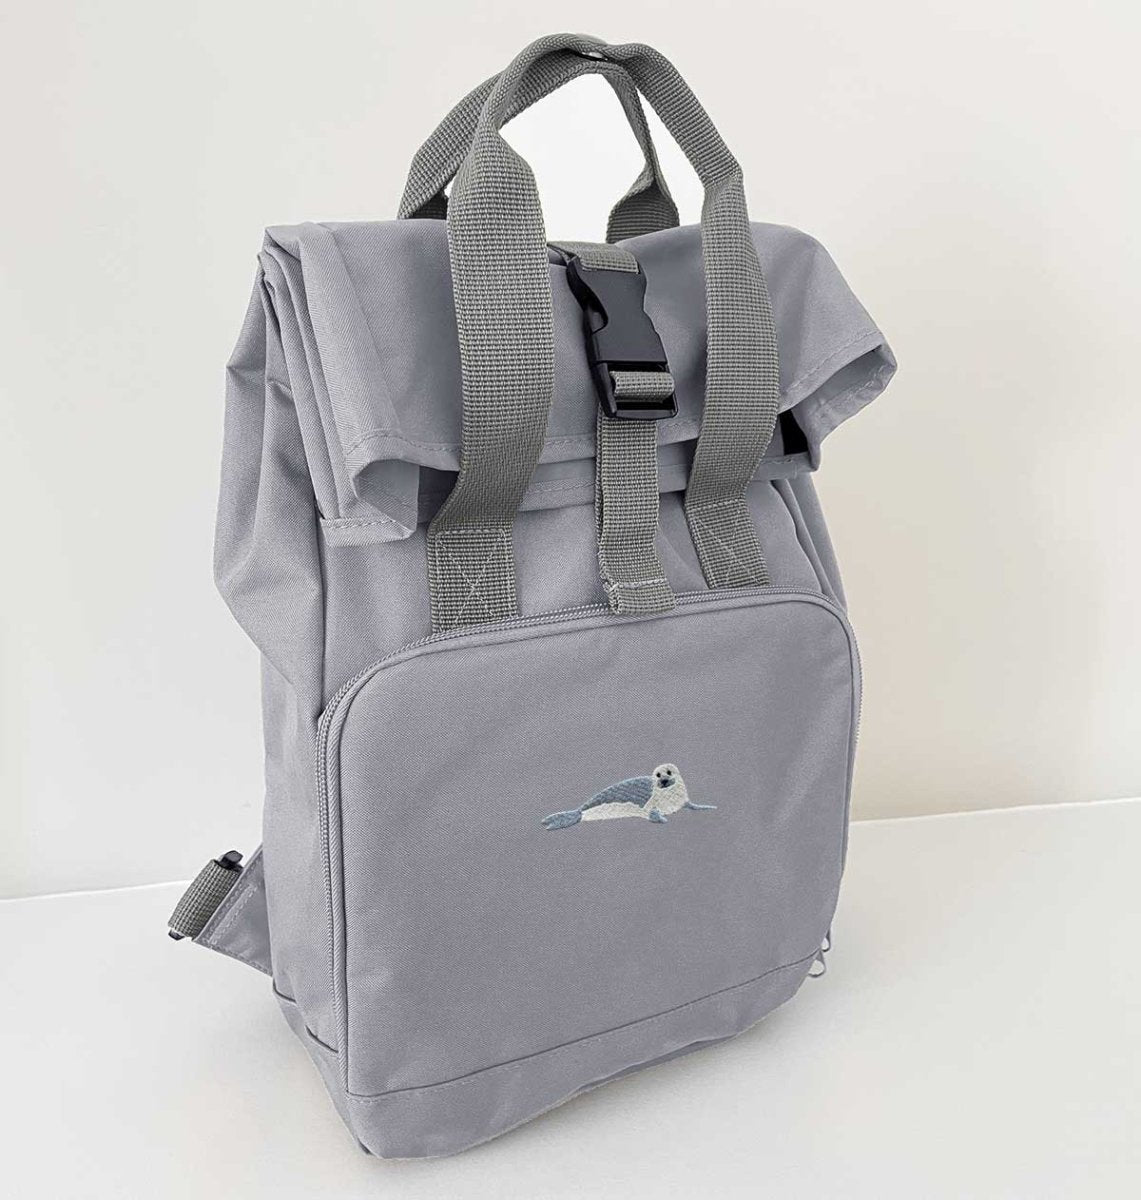 Seal Mini Roll-top Recycled Backpack - Blue Panda